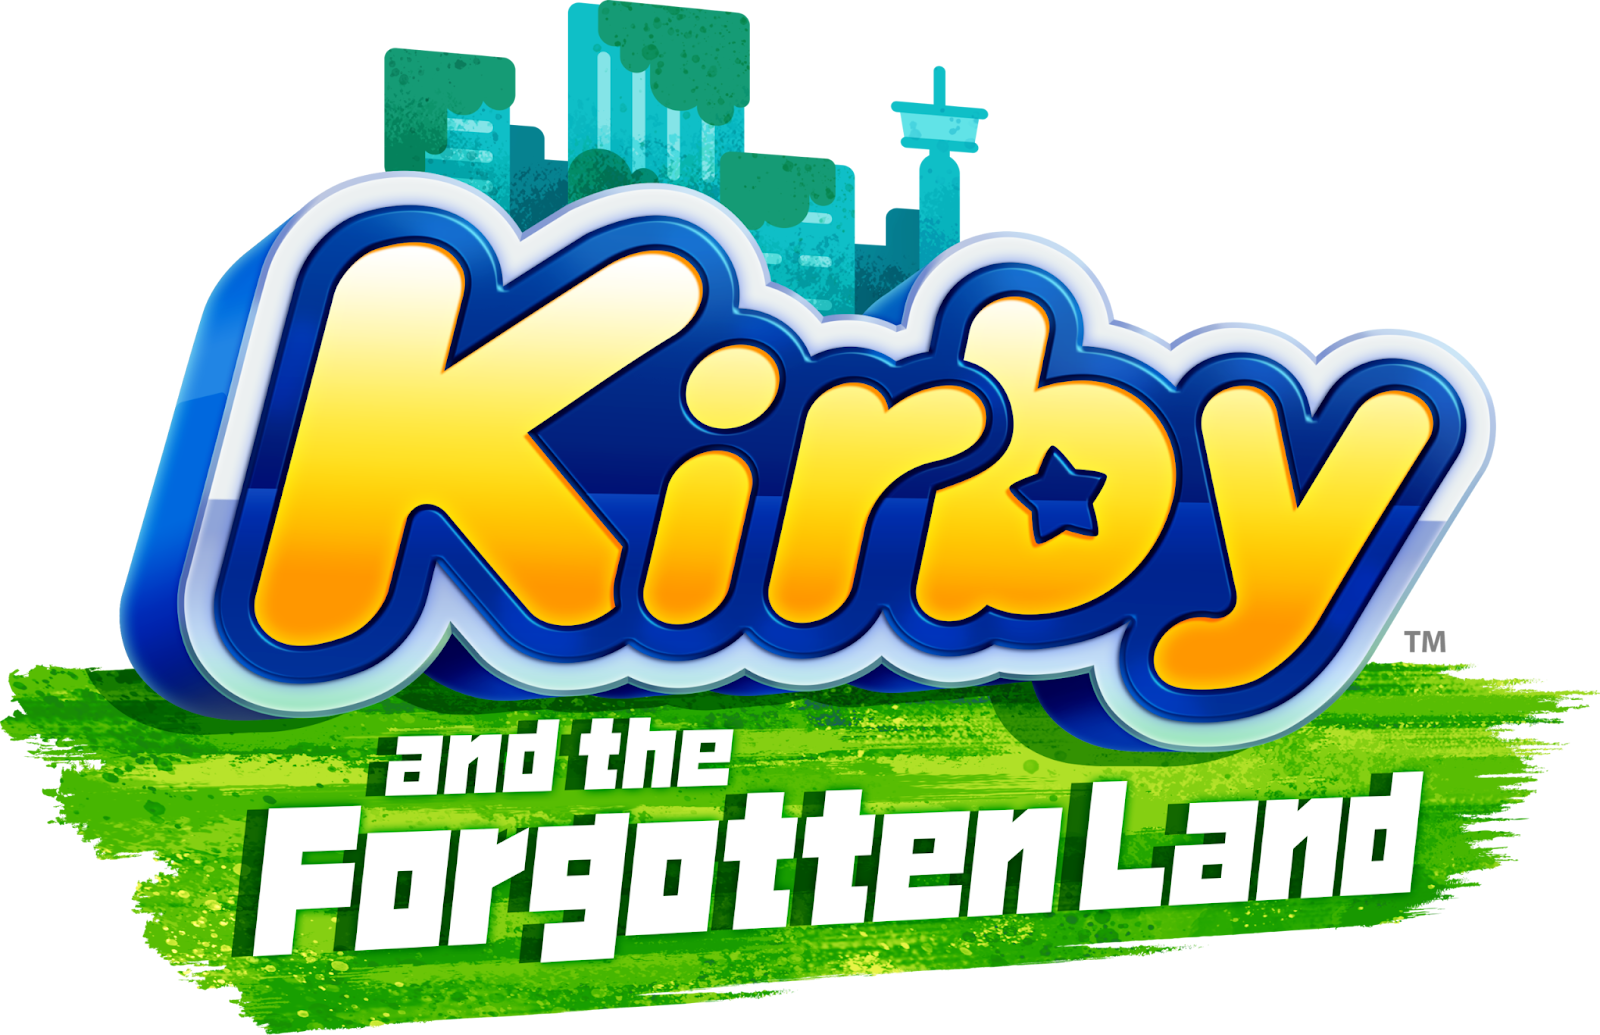 metacritic on X: Expect reviews for Kirby and the Forgotten Land